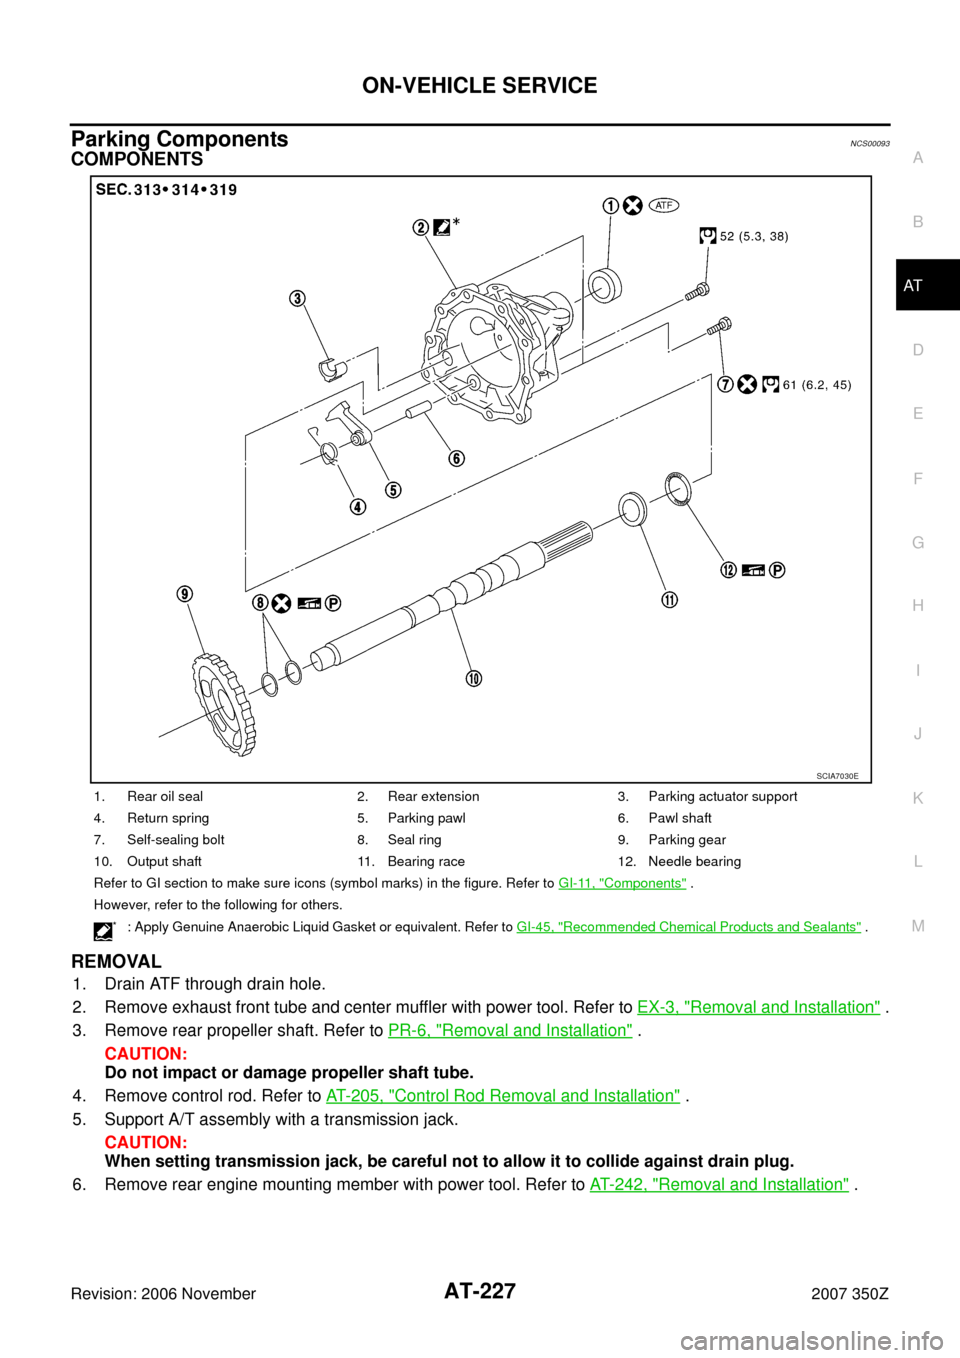 NISSAN 350Z 2007 Z33 Automatic Transmission Workshop Manual ON-VEHICLE SERVICE
AT-227
D
E
F
G
H
I
J
K
L
MA
B
AT
Revision: 2006 November2007 350Z
Parking ComponentsNCS00093
COMPONENTS
REMOVAL
1. Drain ATF through drain hole.
2. Remove exhaust front tube and cen